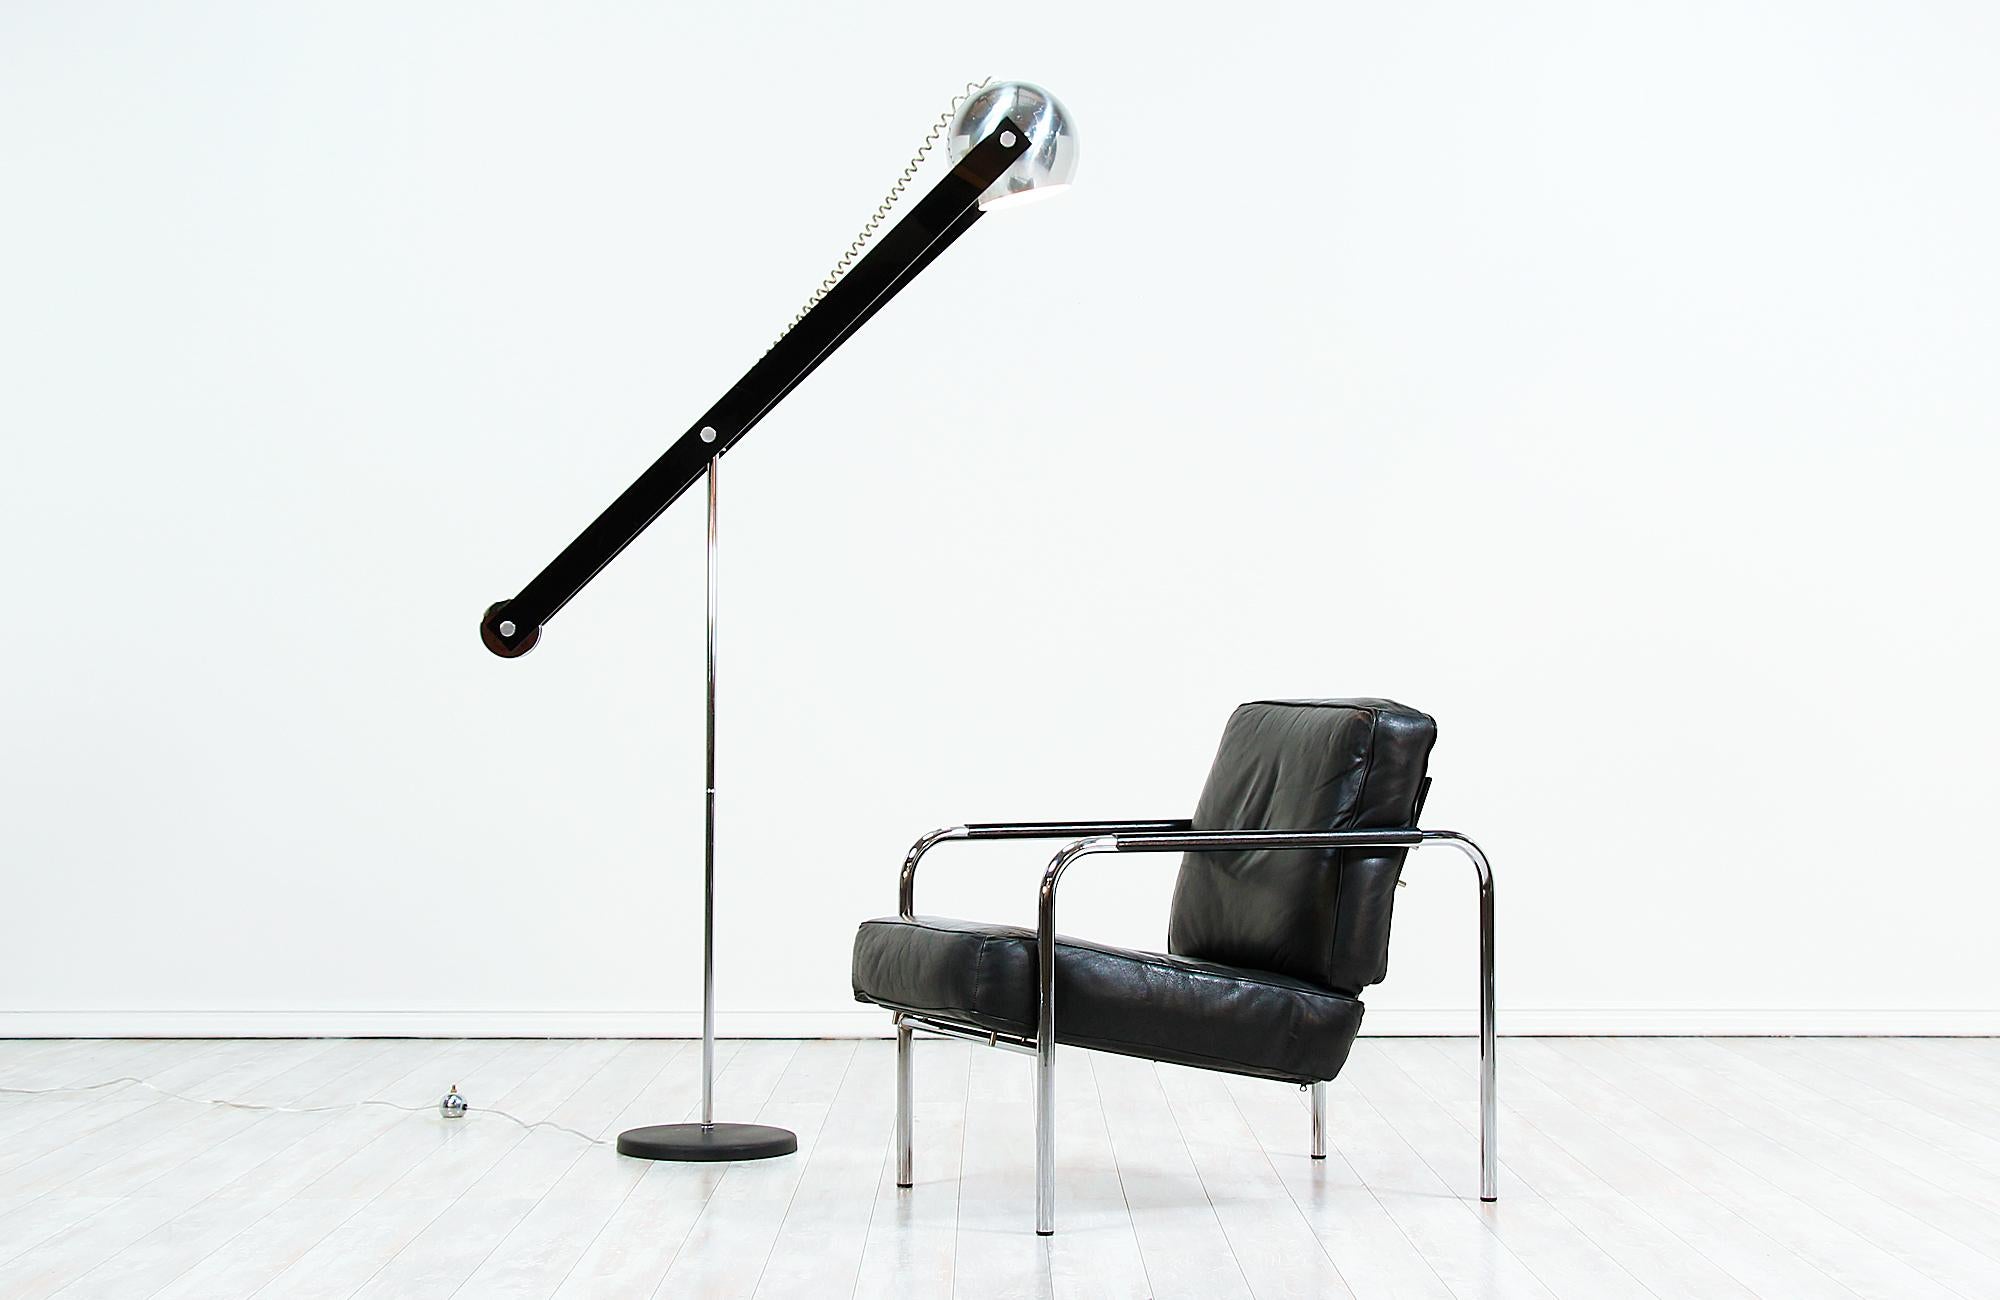 Adjustable chrome orb floor lamp designed and manufactured in the United States, circa 1970s. This retro modernist lamp features a polished chrome metal body and hardware that is perfectly complemented by the black Lucite arm and black metal base.